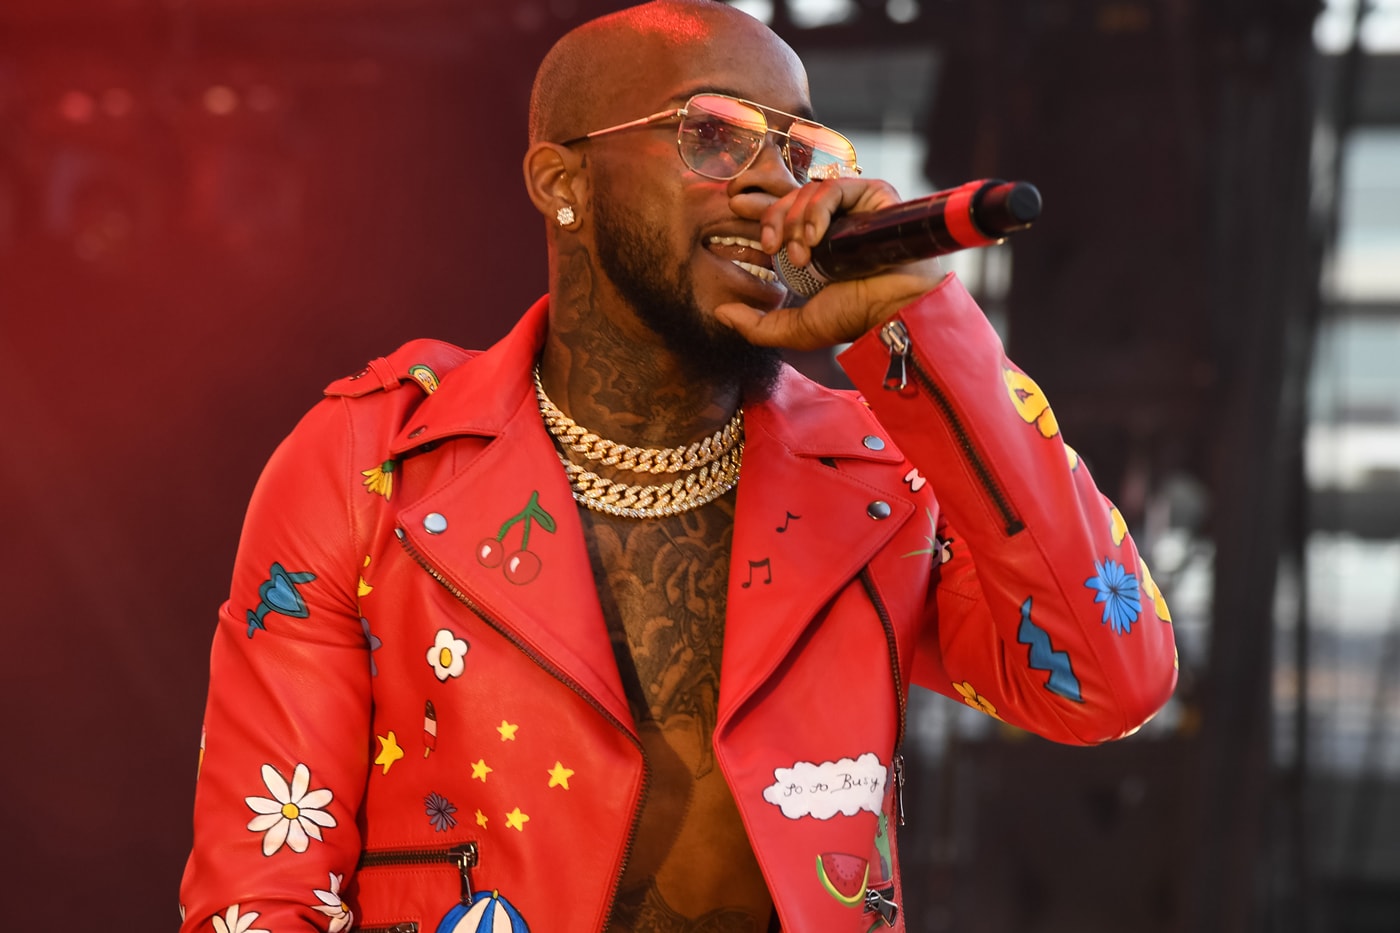 tory-lanez-i-told-you-release-date-2016-tour